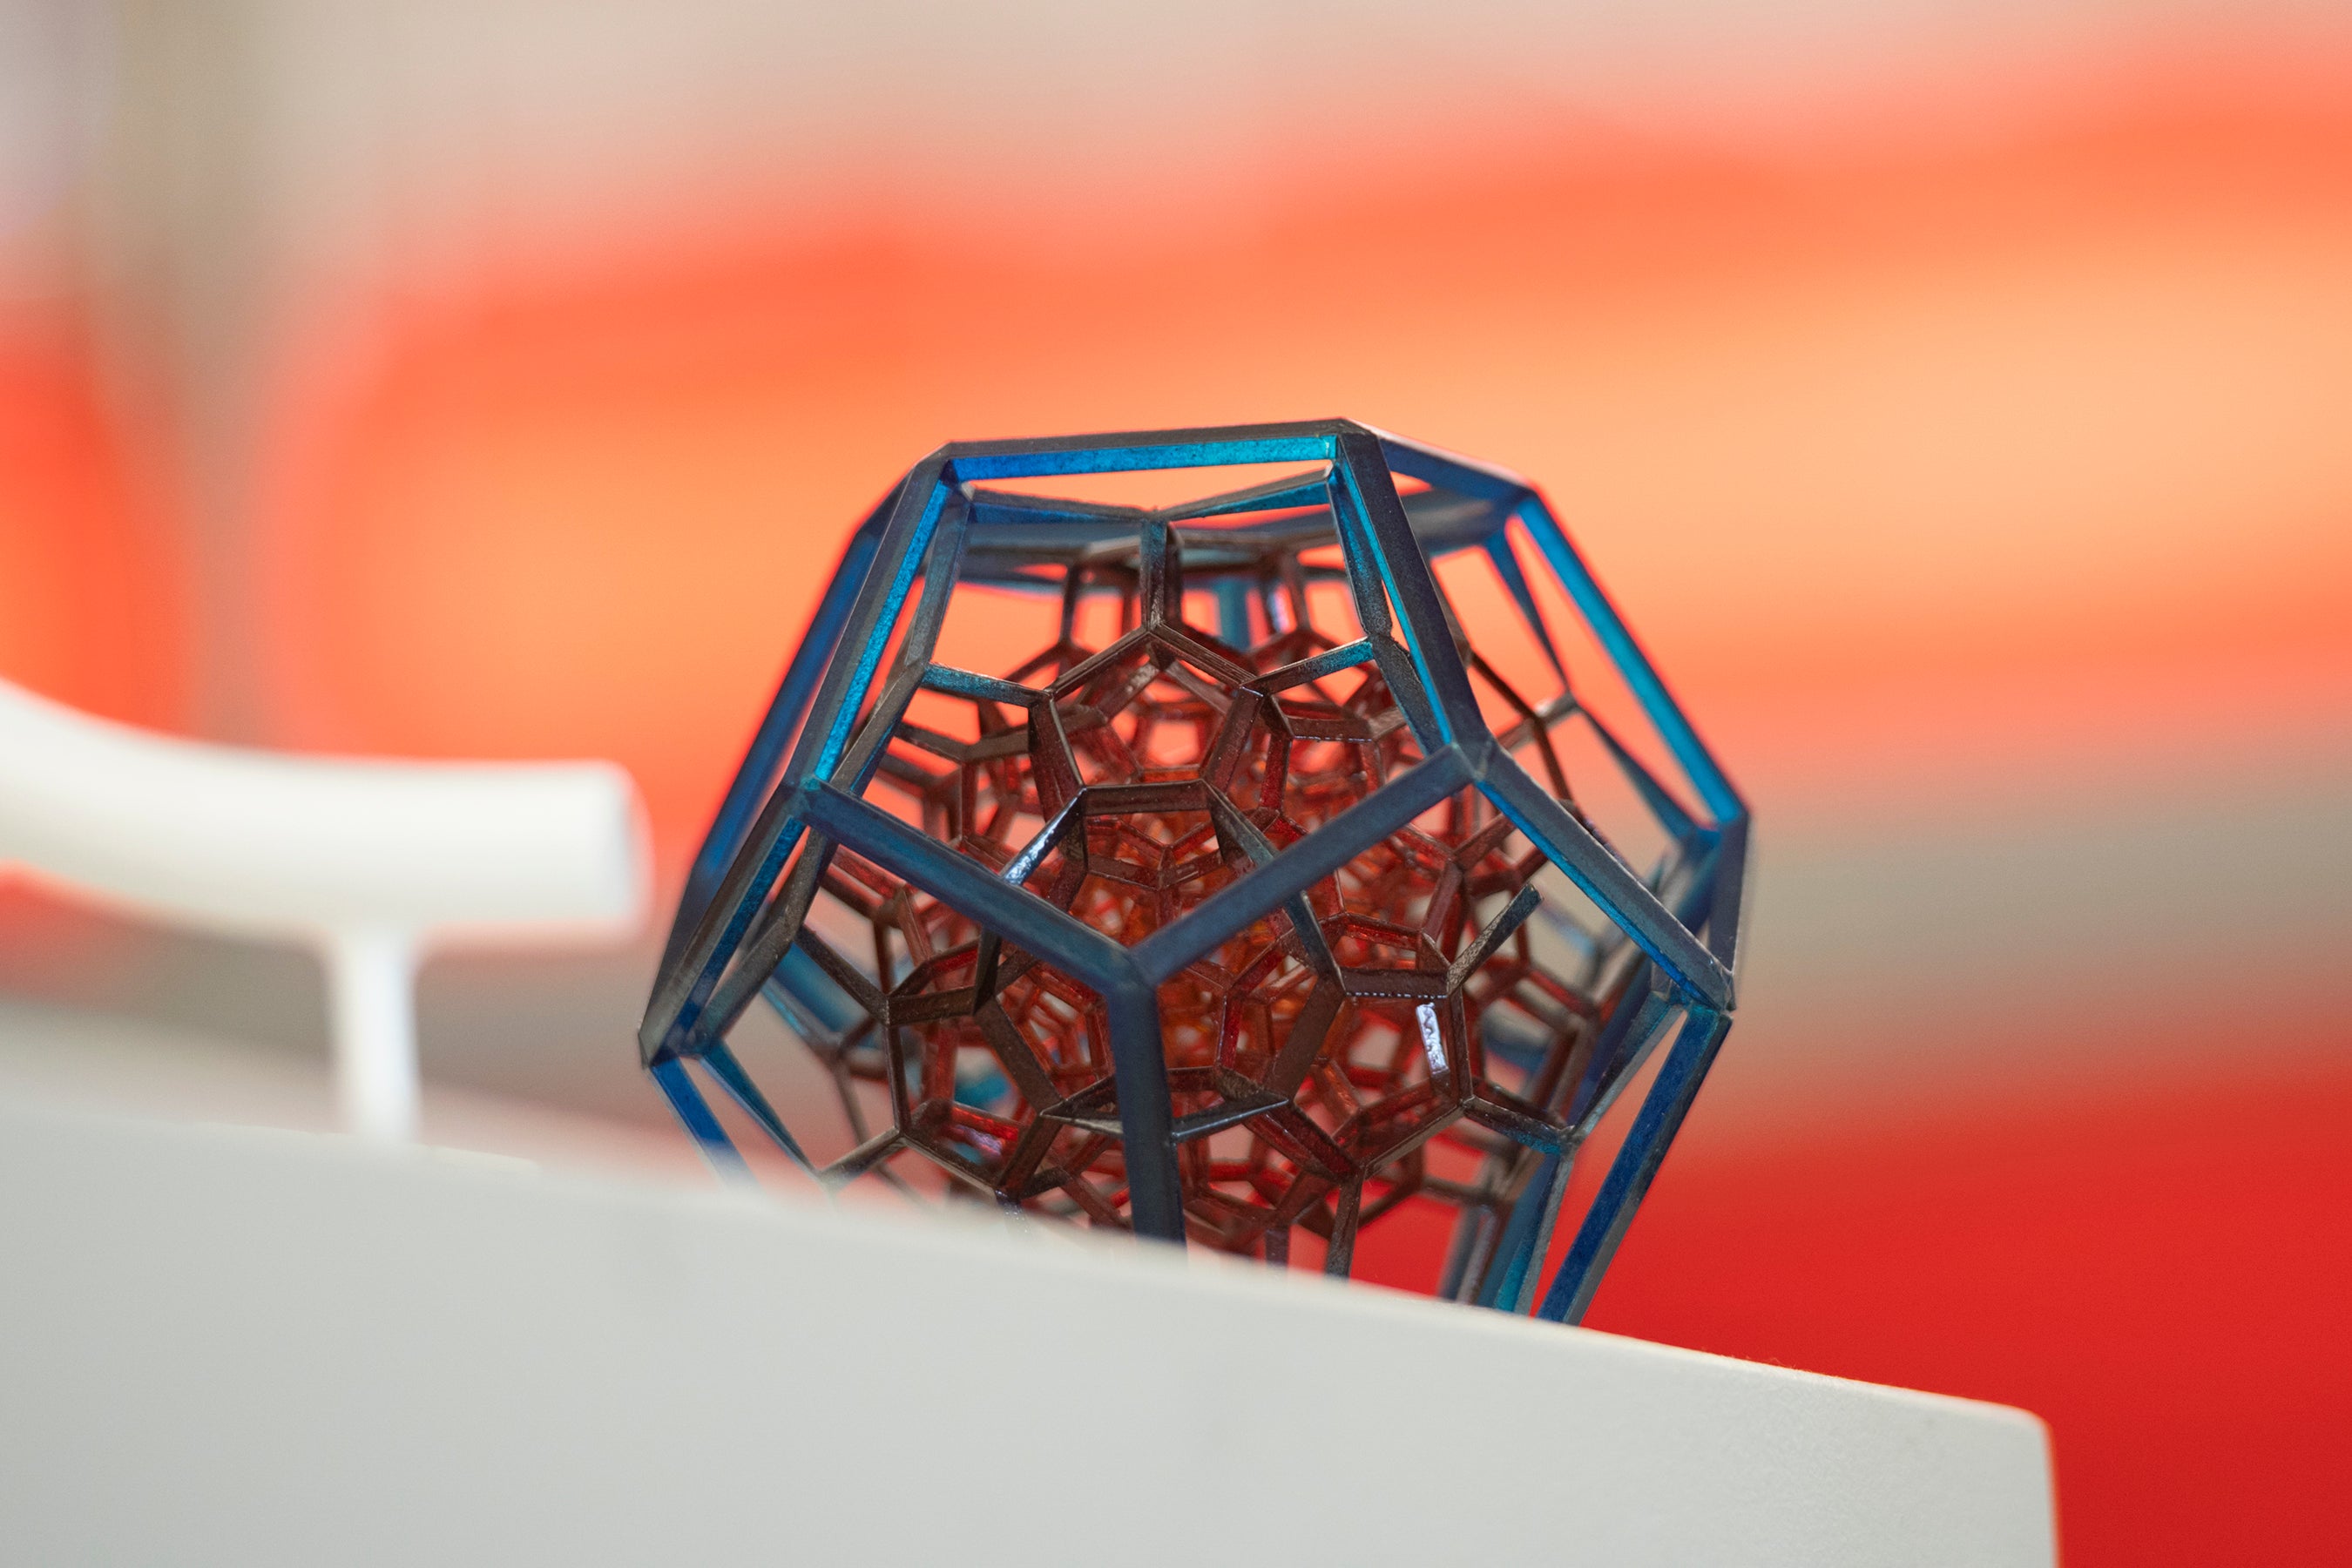 Picture of complex 3d pentagonal structure, with many pentagons inside it